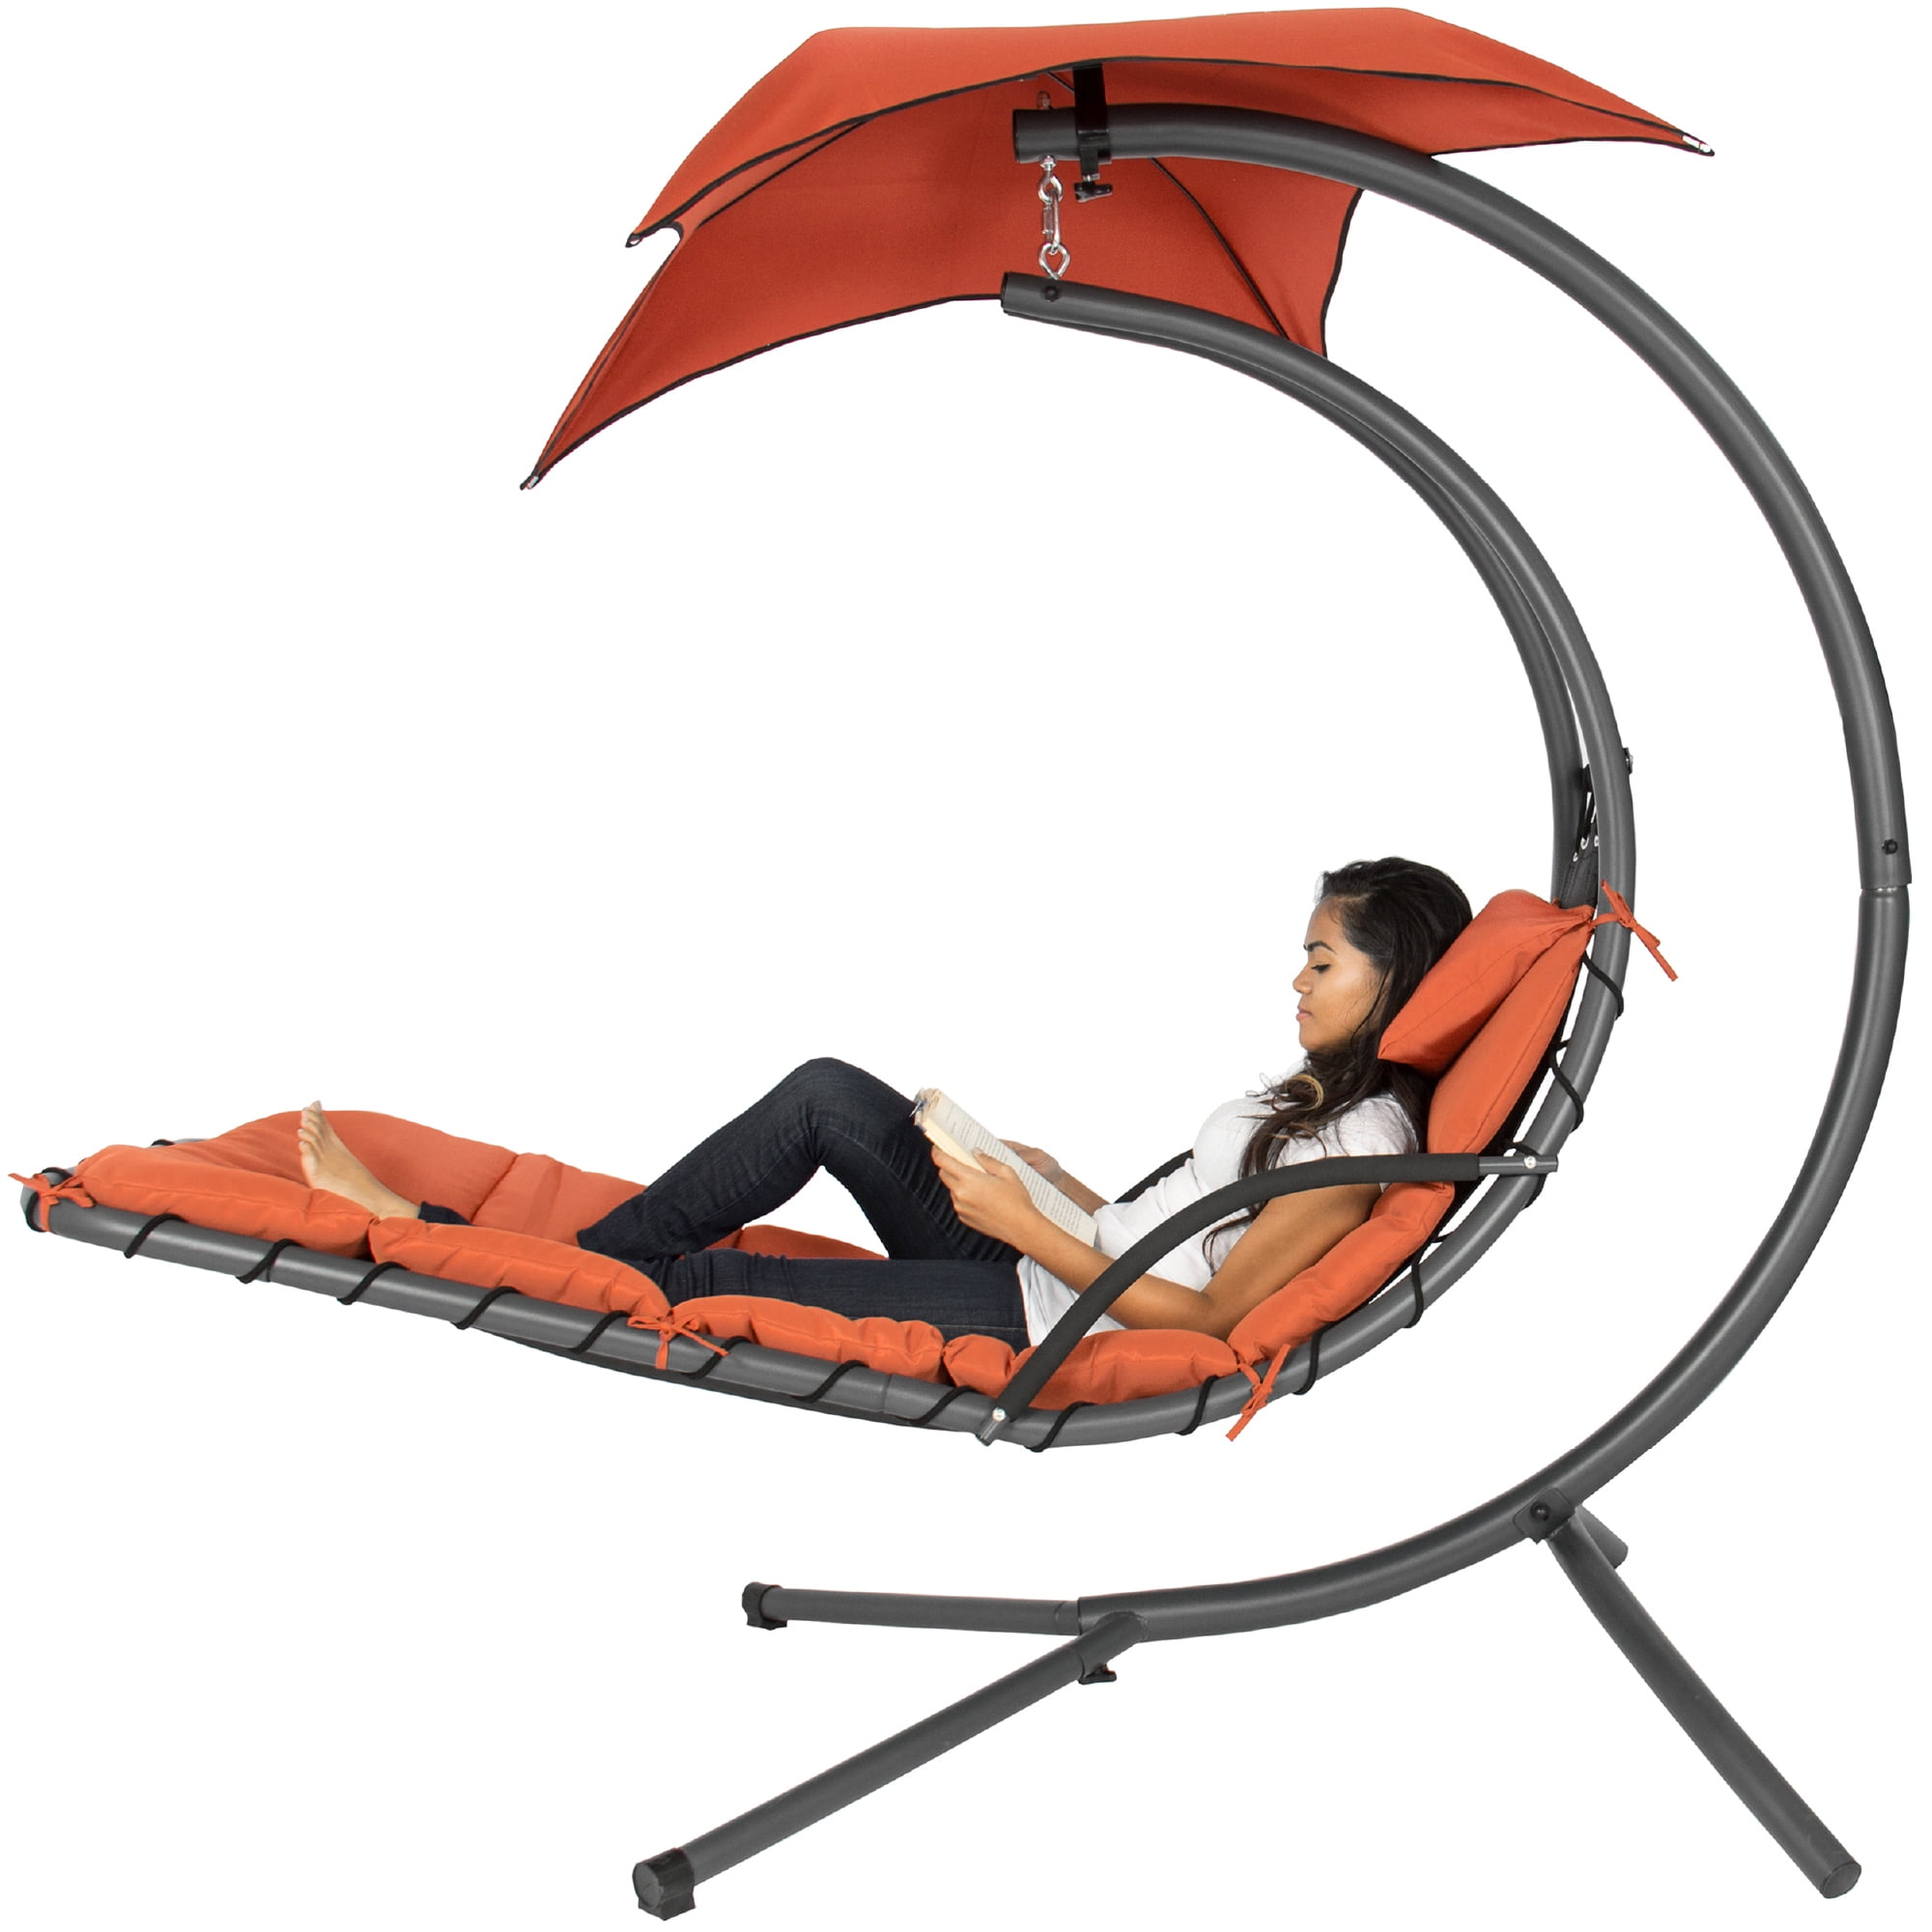 Red-Orange Flamaker Patio Hammock Lounge Chair Hanging Chaise Lounger Chair Hammock Stand Outdoor Chair Floating Chaise Swing Chair with Canopy 